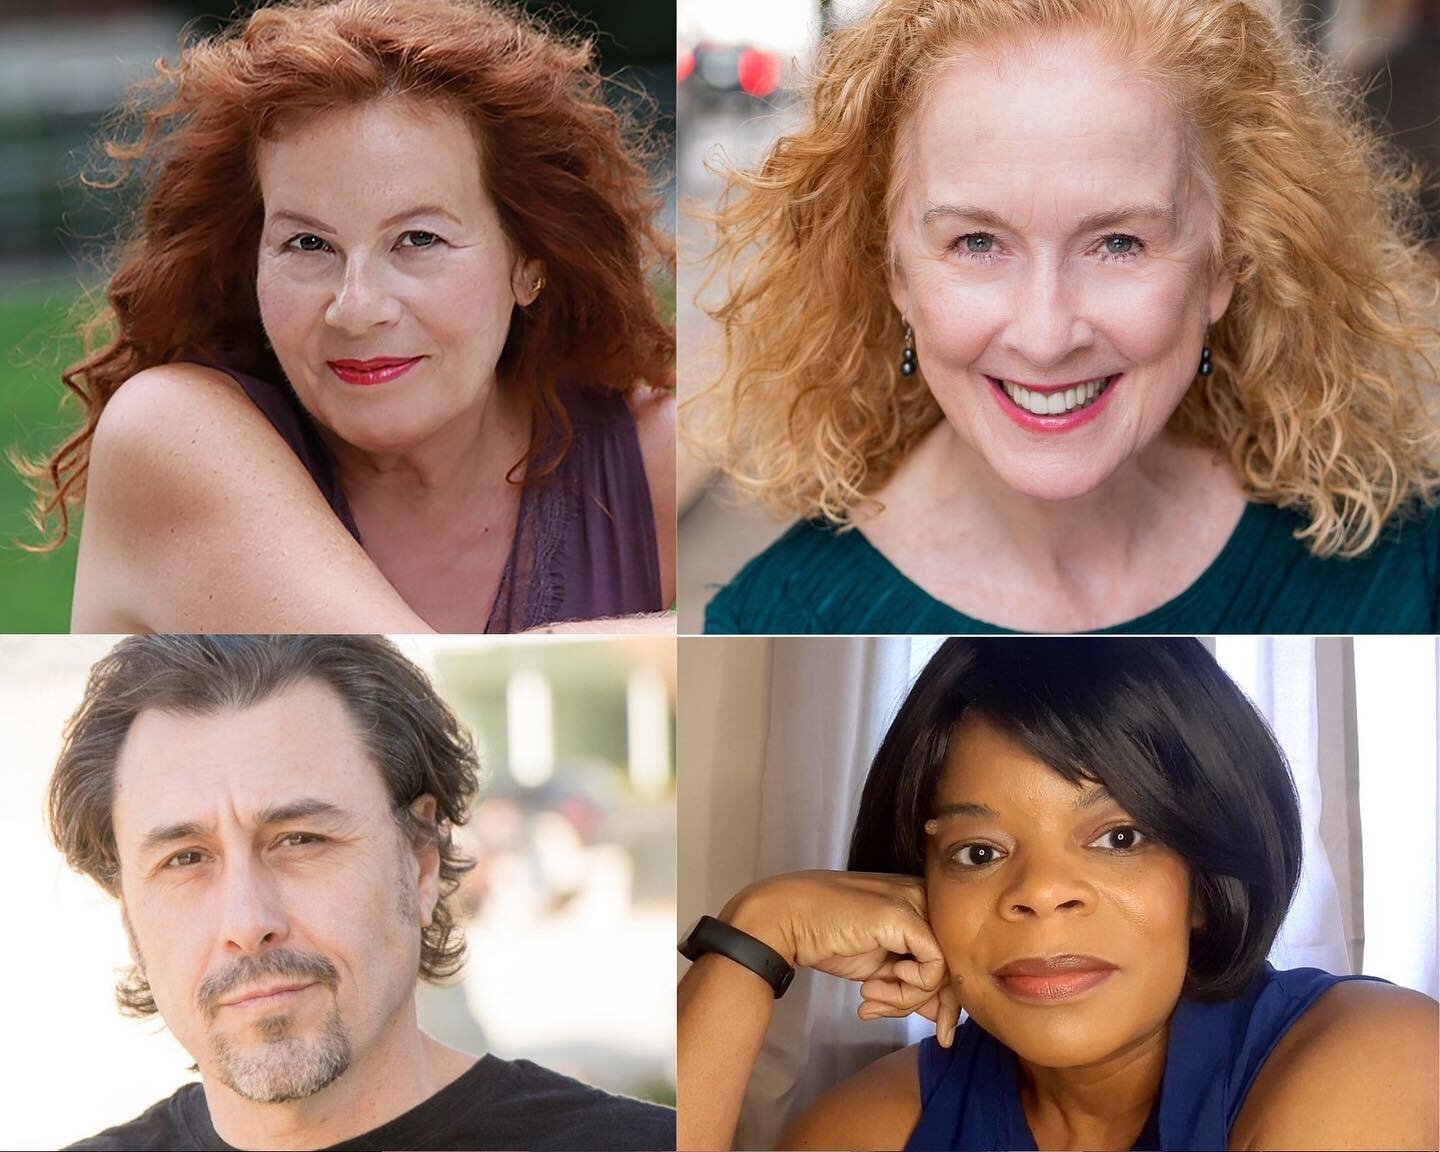 Our 2021 Online Theater Festival features 13 short plays and monologues, written and performed by a talented lineup of artists including Caridad Svich, reg e gaines, Ashley L. Calder&oacute;n, Jossie Ortiz, Nia Akilah Robinson and many more. Only on 